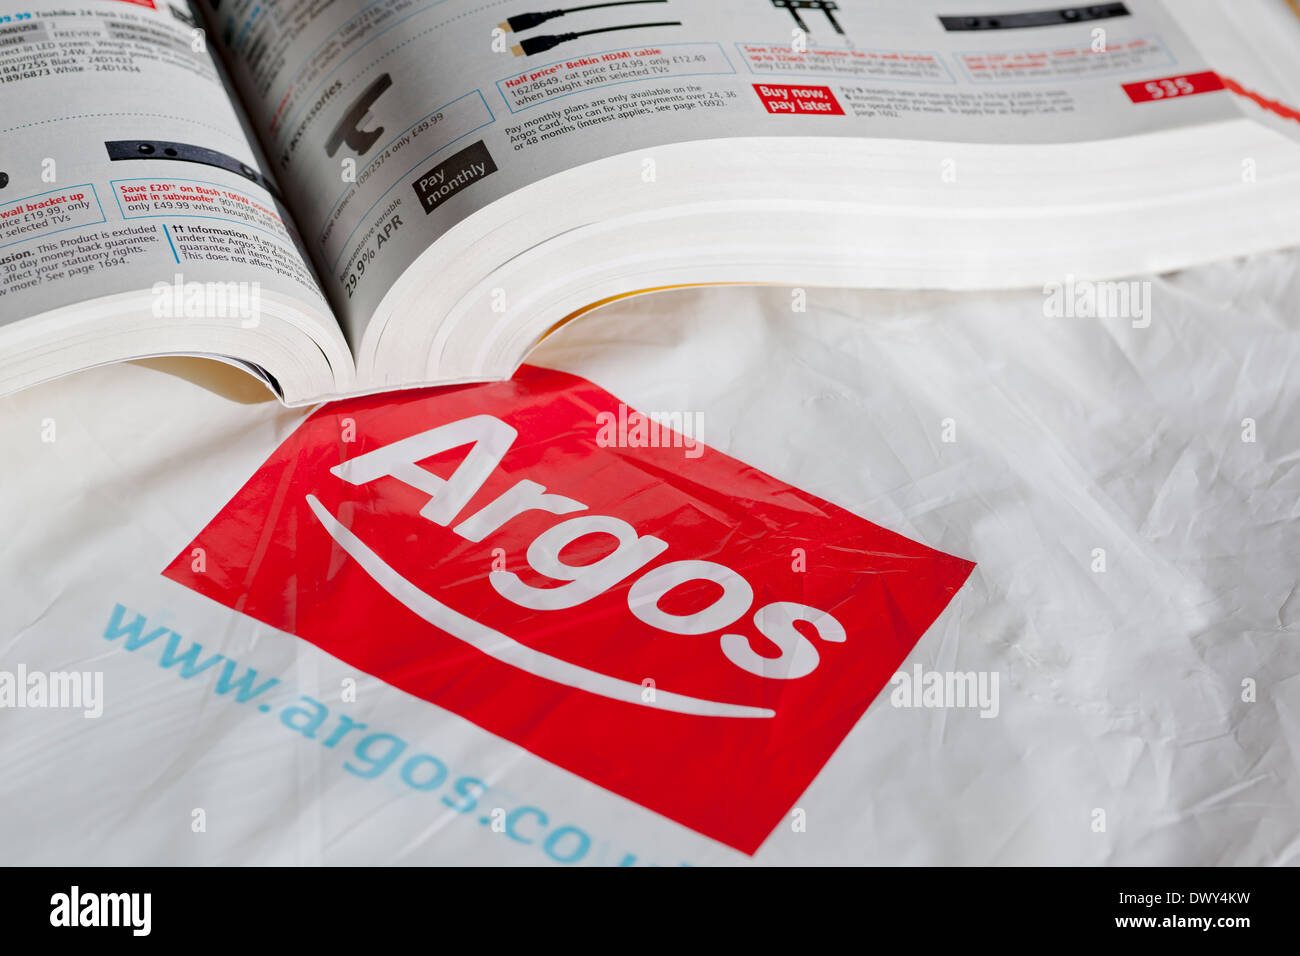 Close up of Argos shop store catalogue book and shopping bag with logo sign Stock Photo